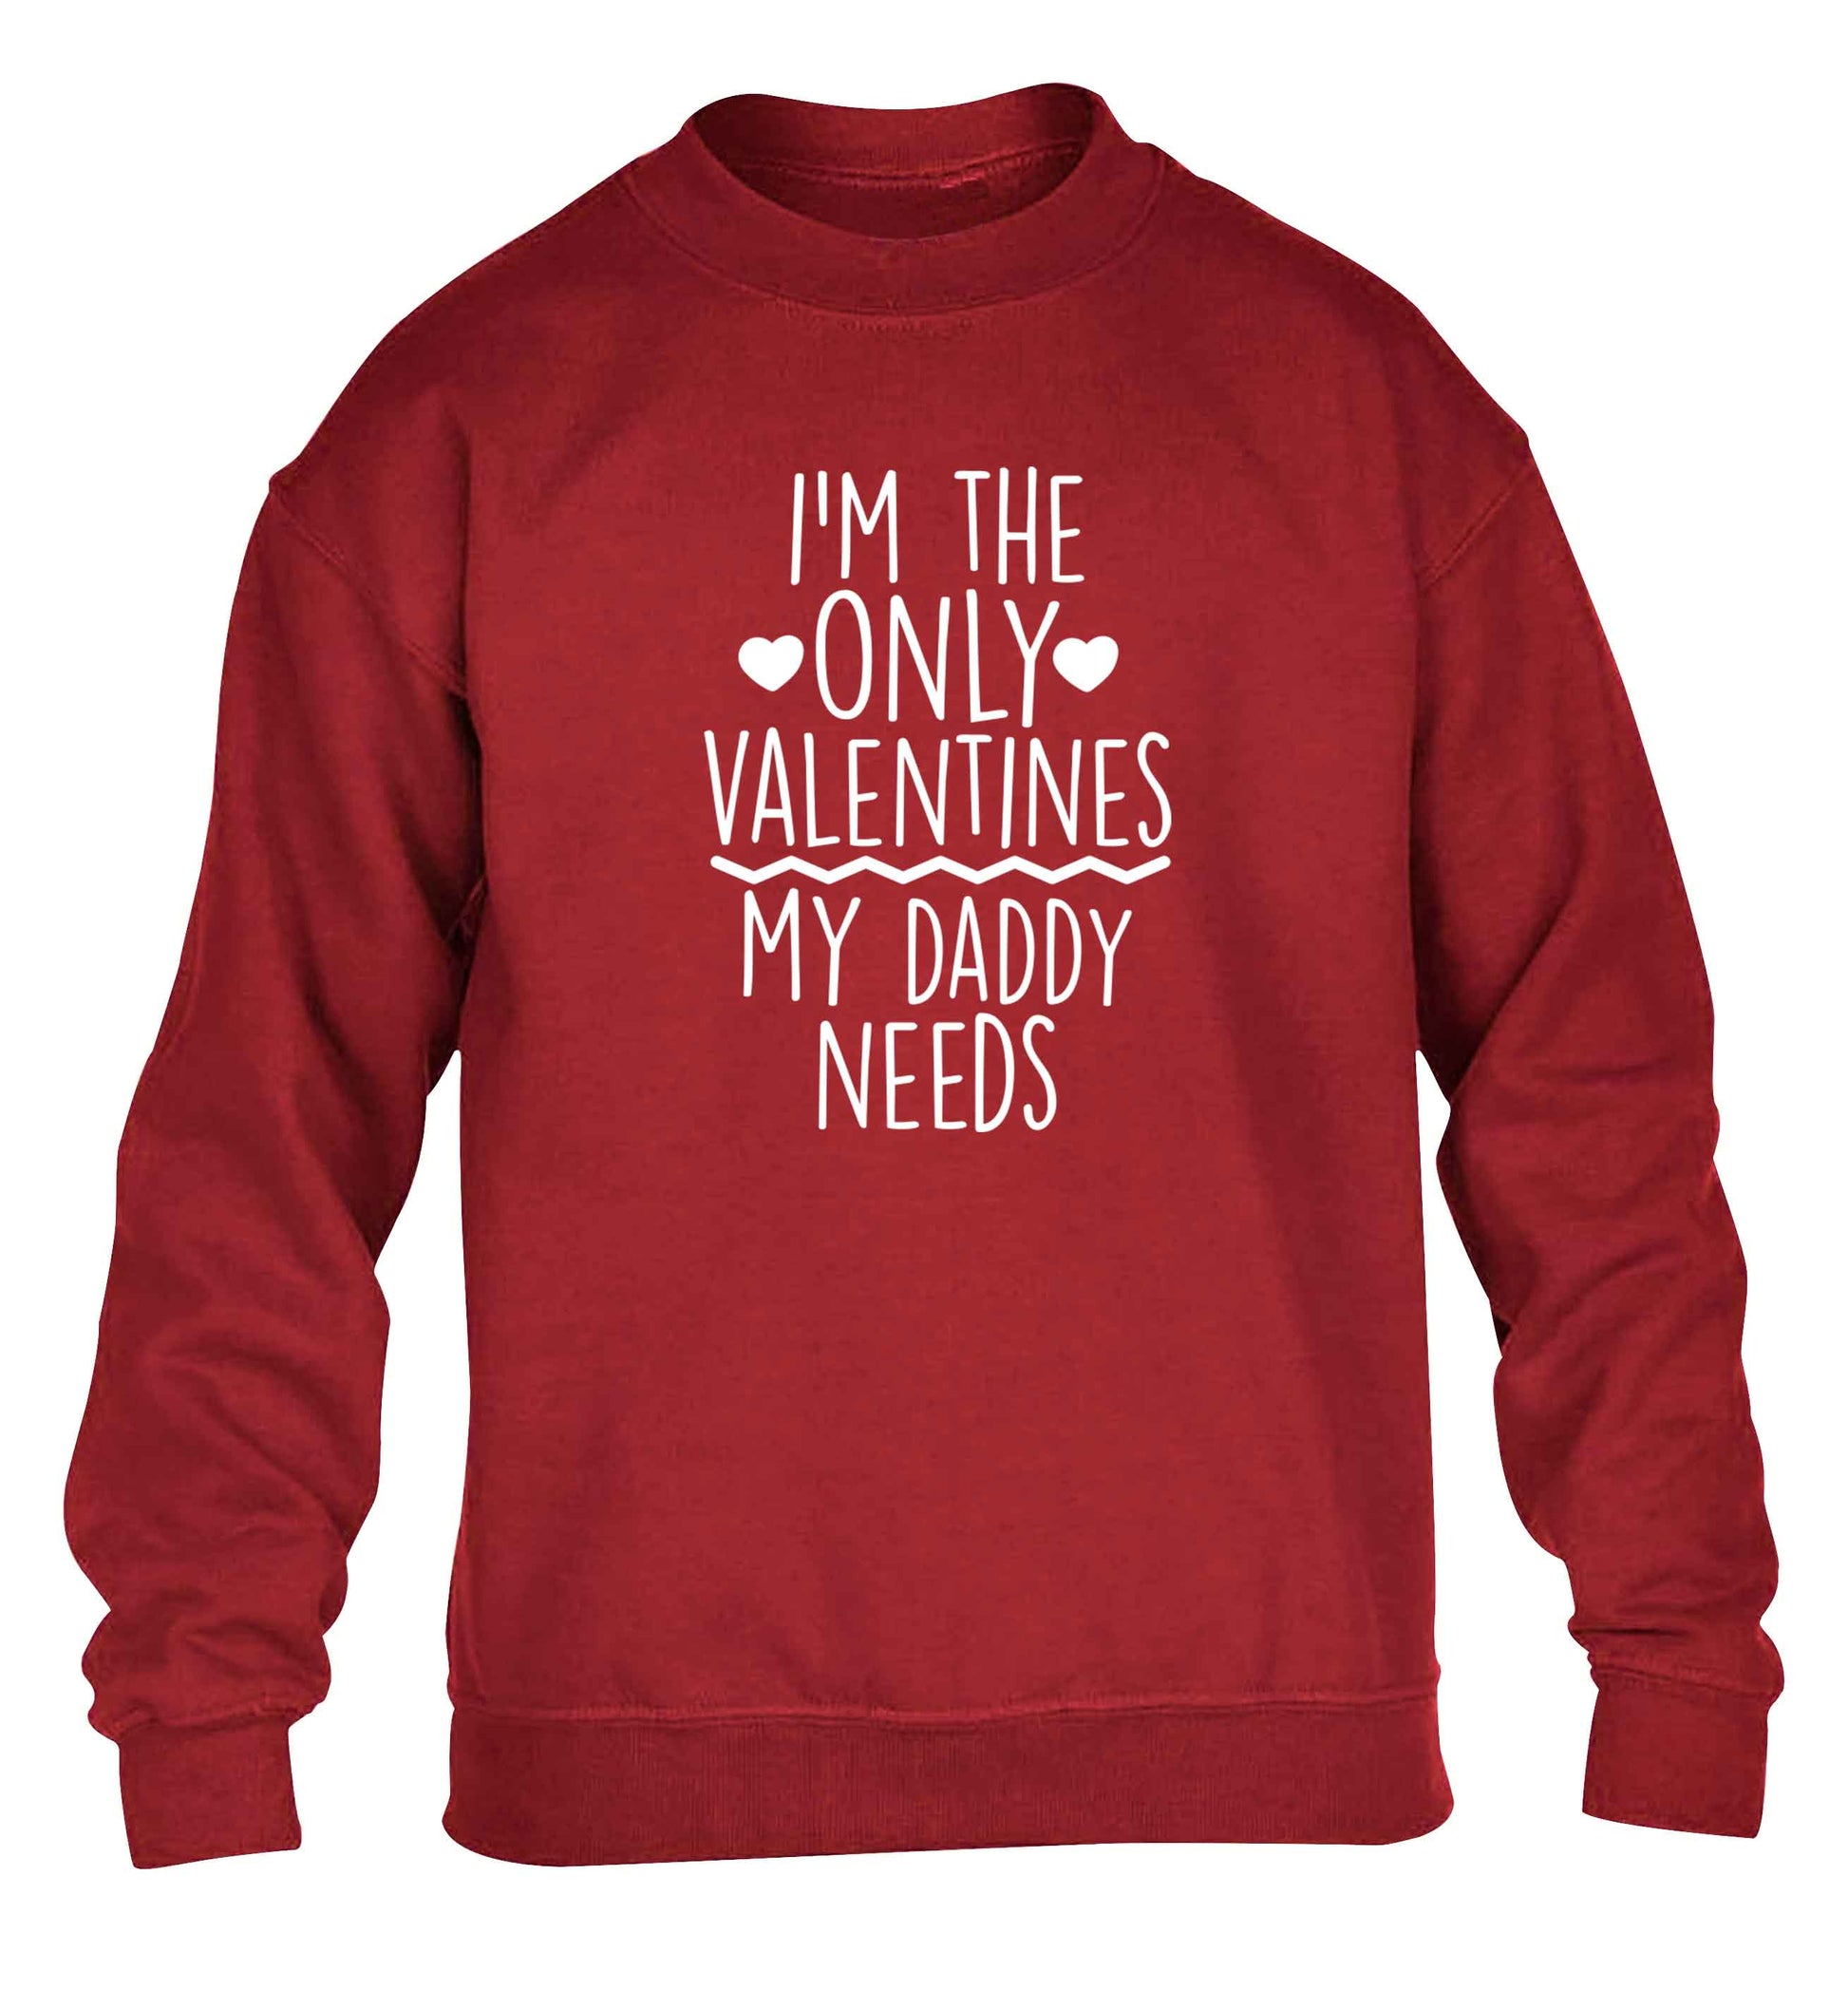 I'm the only valentines my daddy needs children's grey sweater 12-13 Years